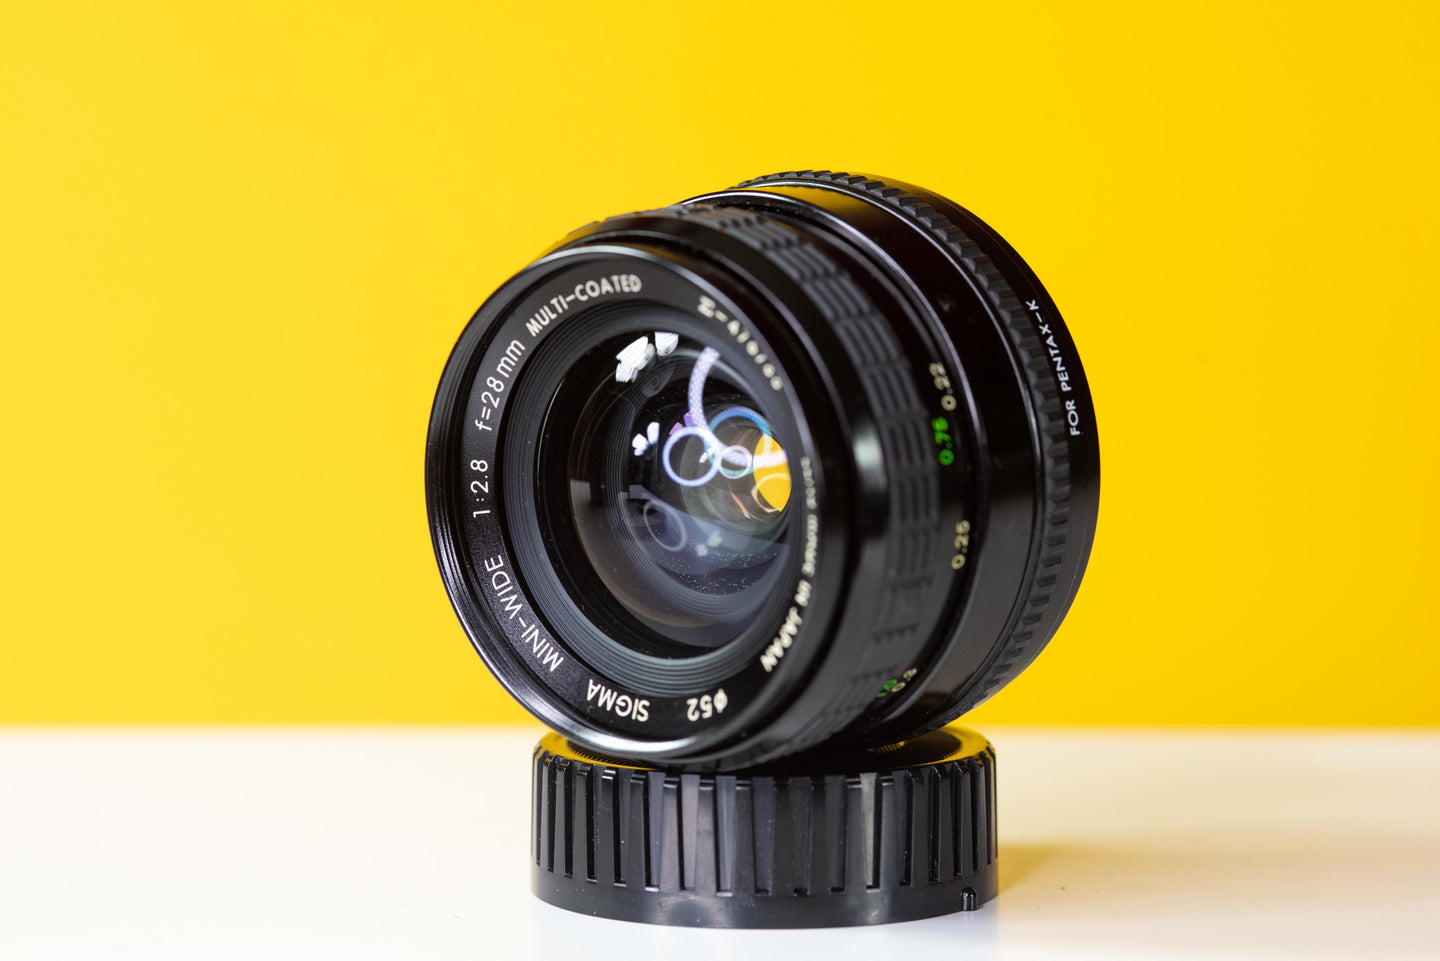 Sigma Mini-Wide 28mm f/2.8 Lens for Pentax PK Mount